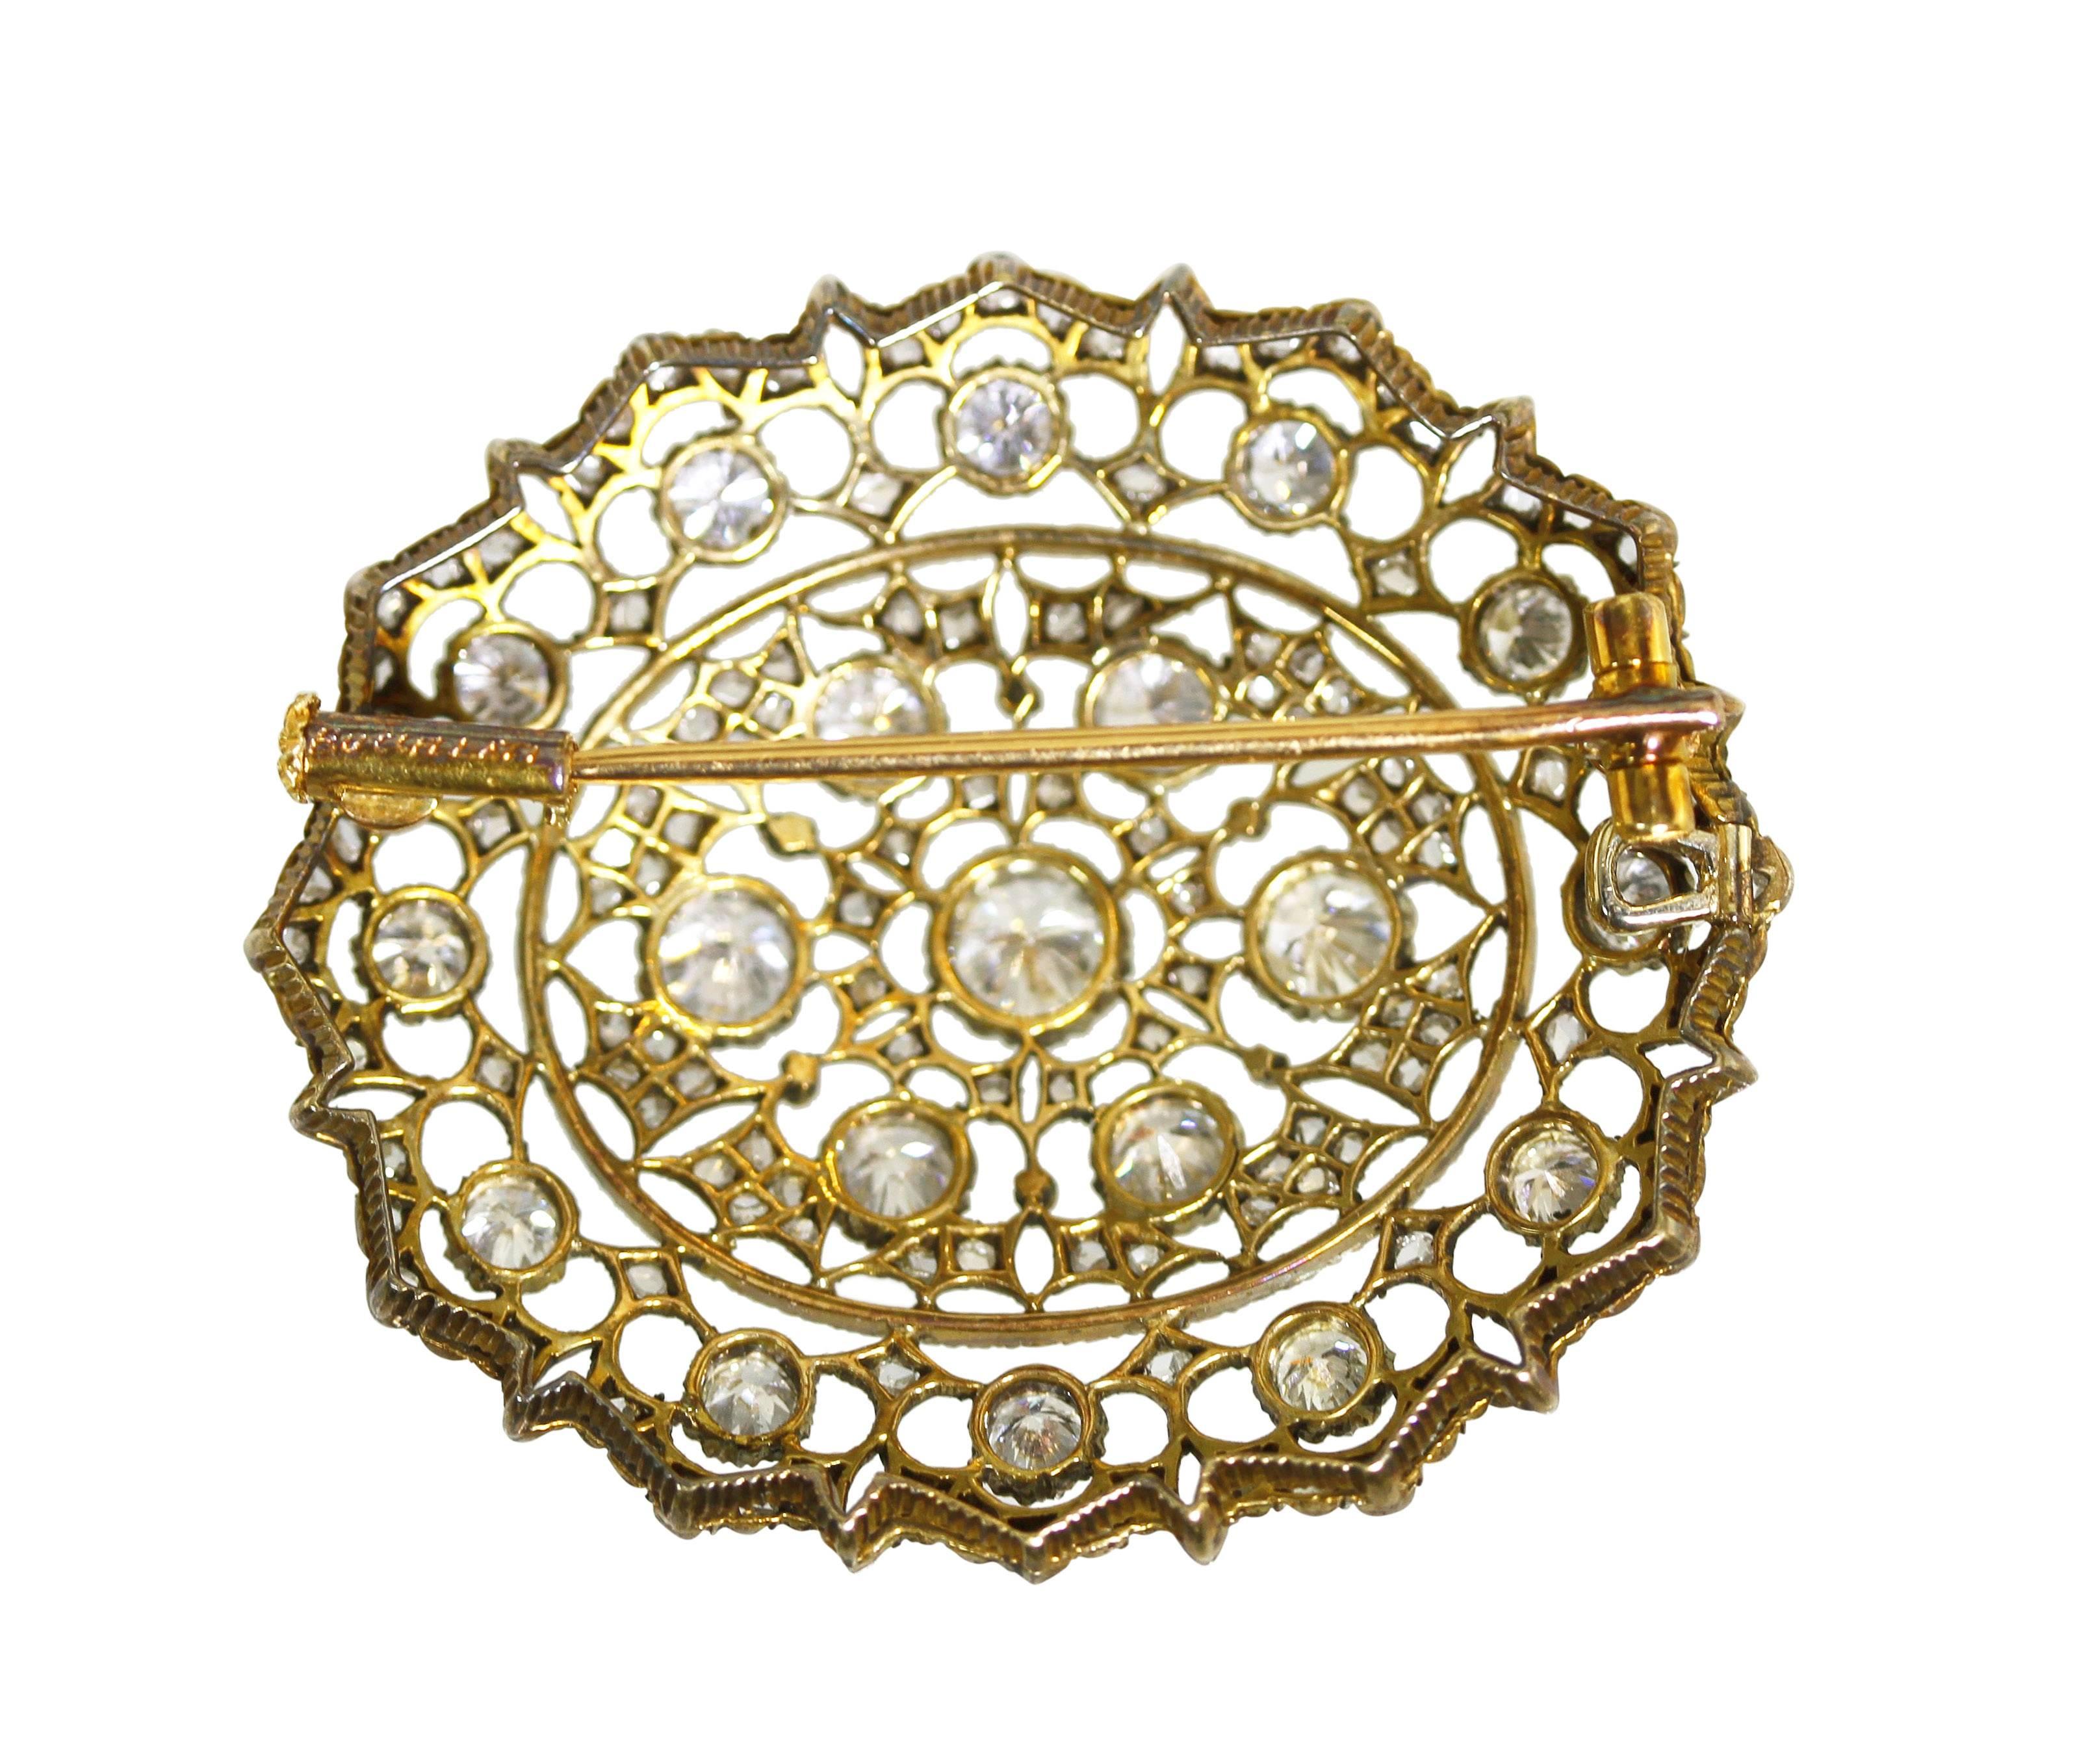 An 18 karat gold, silver and diamond brooch by Mario Buccellati, Italy, circa 1930, of open design set with 19 round diamonds weighing approximately 2.50 carats and 134 rose cut diamonds weighing approximately 1.00 carat, measuring 1 1/2 by 1 3/8